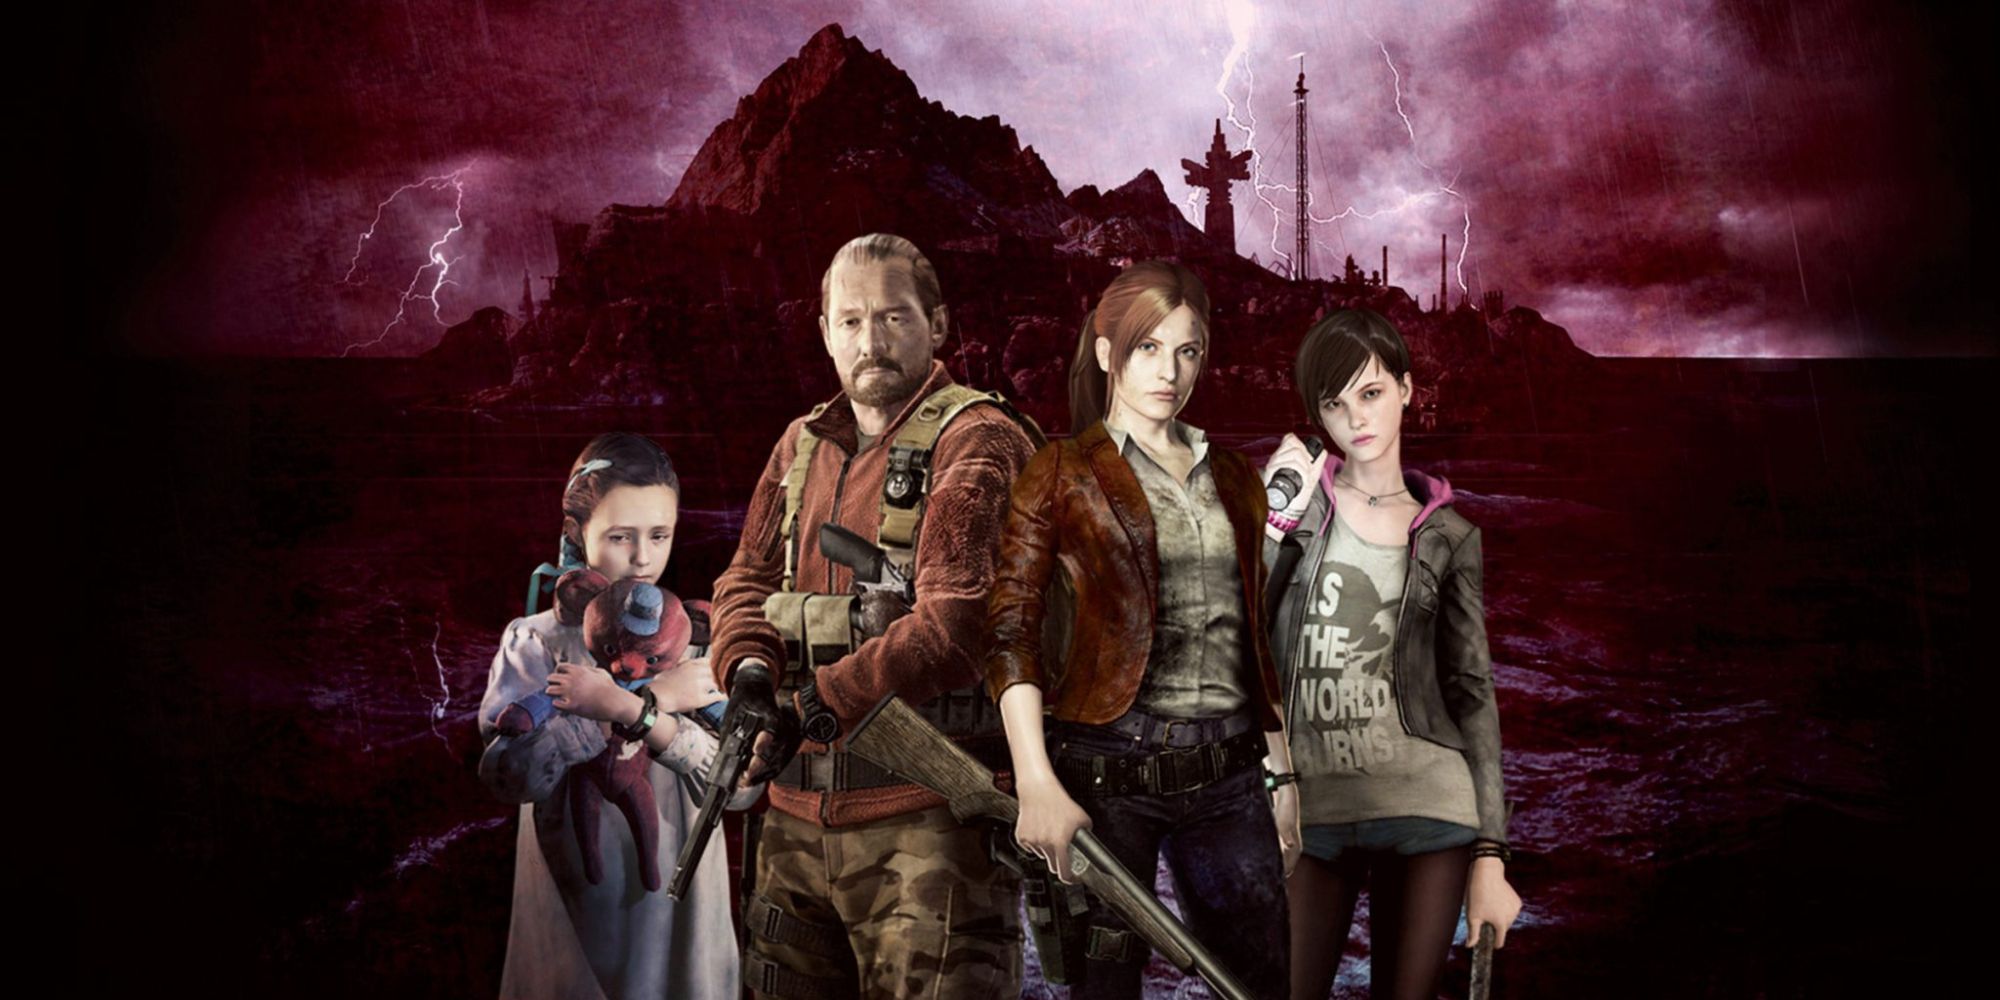 Four characters on the cover for Resident Evil: Revelations 2